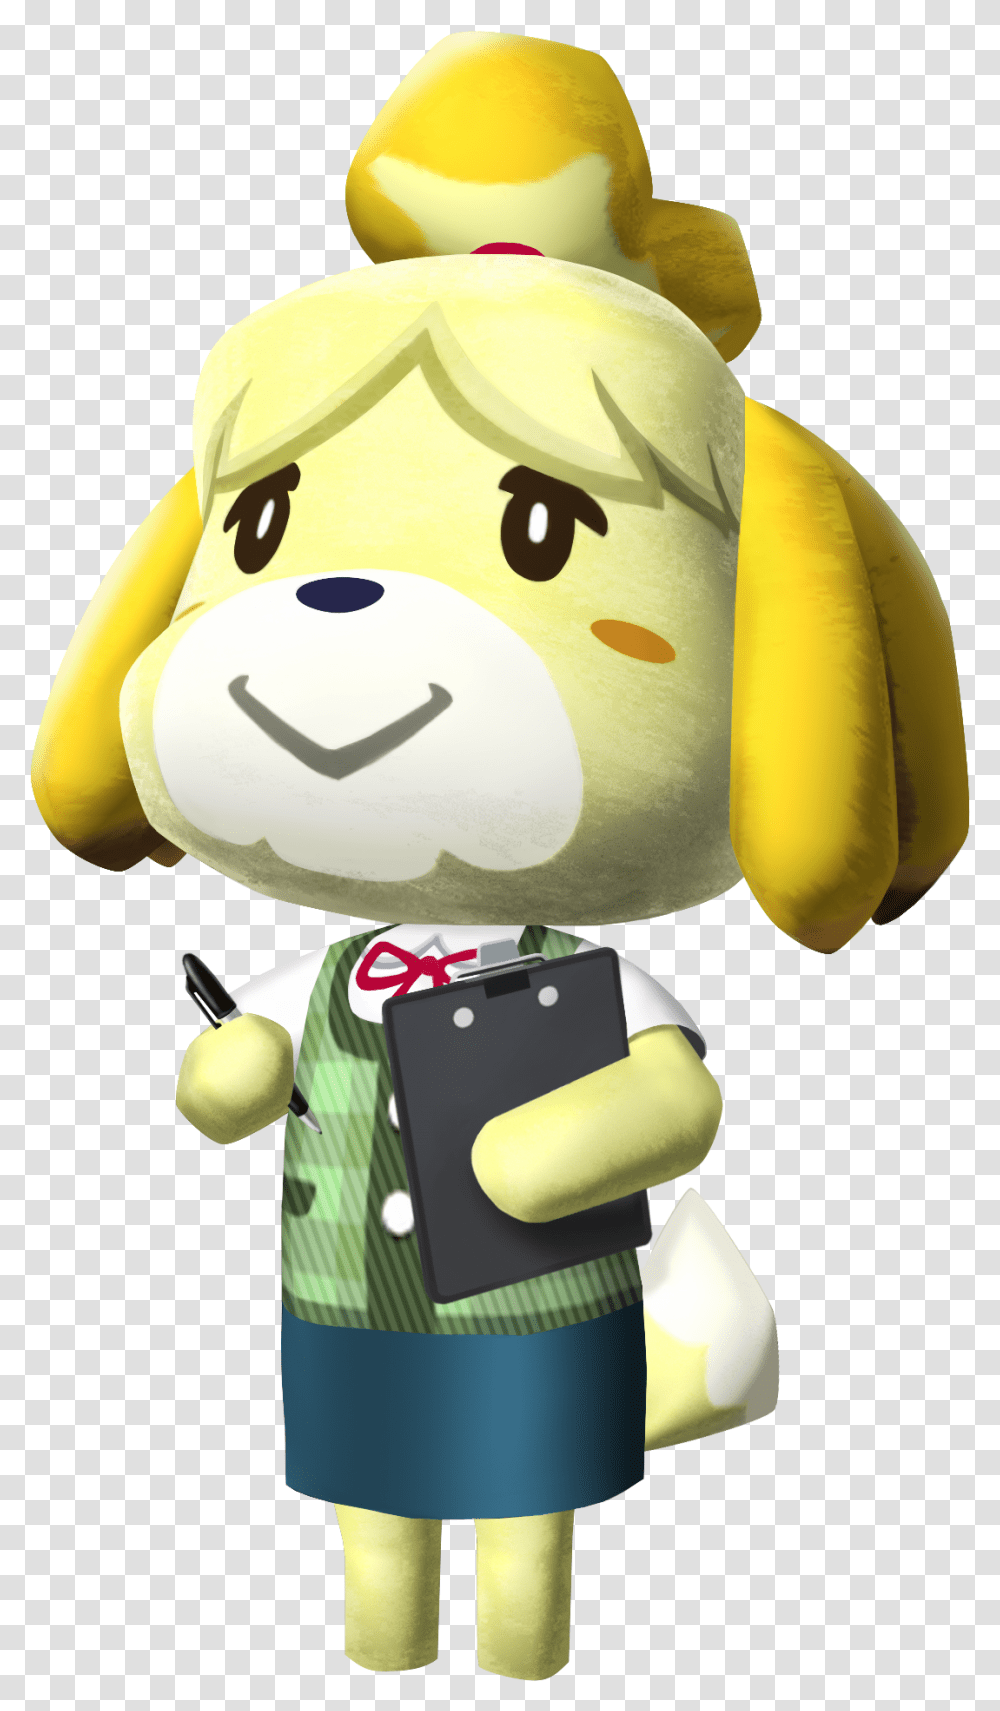 Animal Crossing, Mascot, Figurine, Toy, Sweets Transparent Png